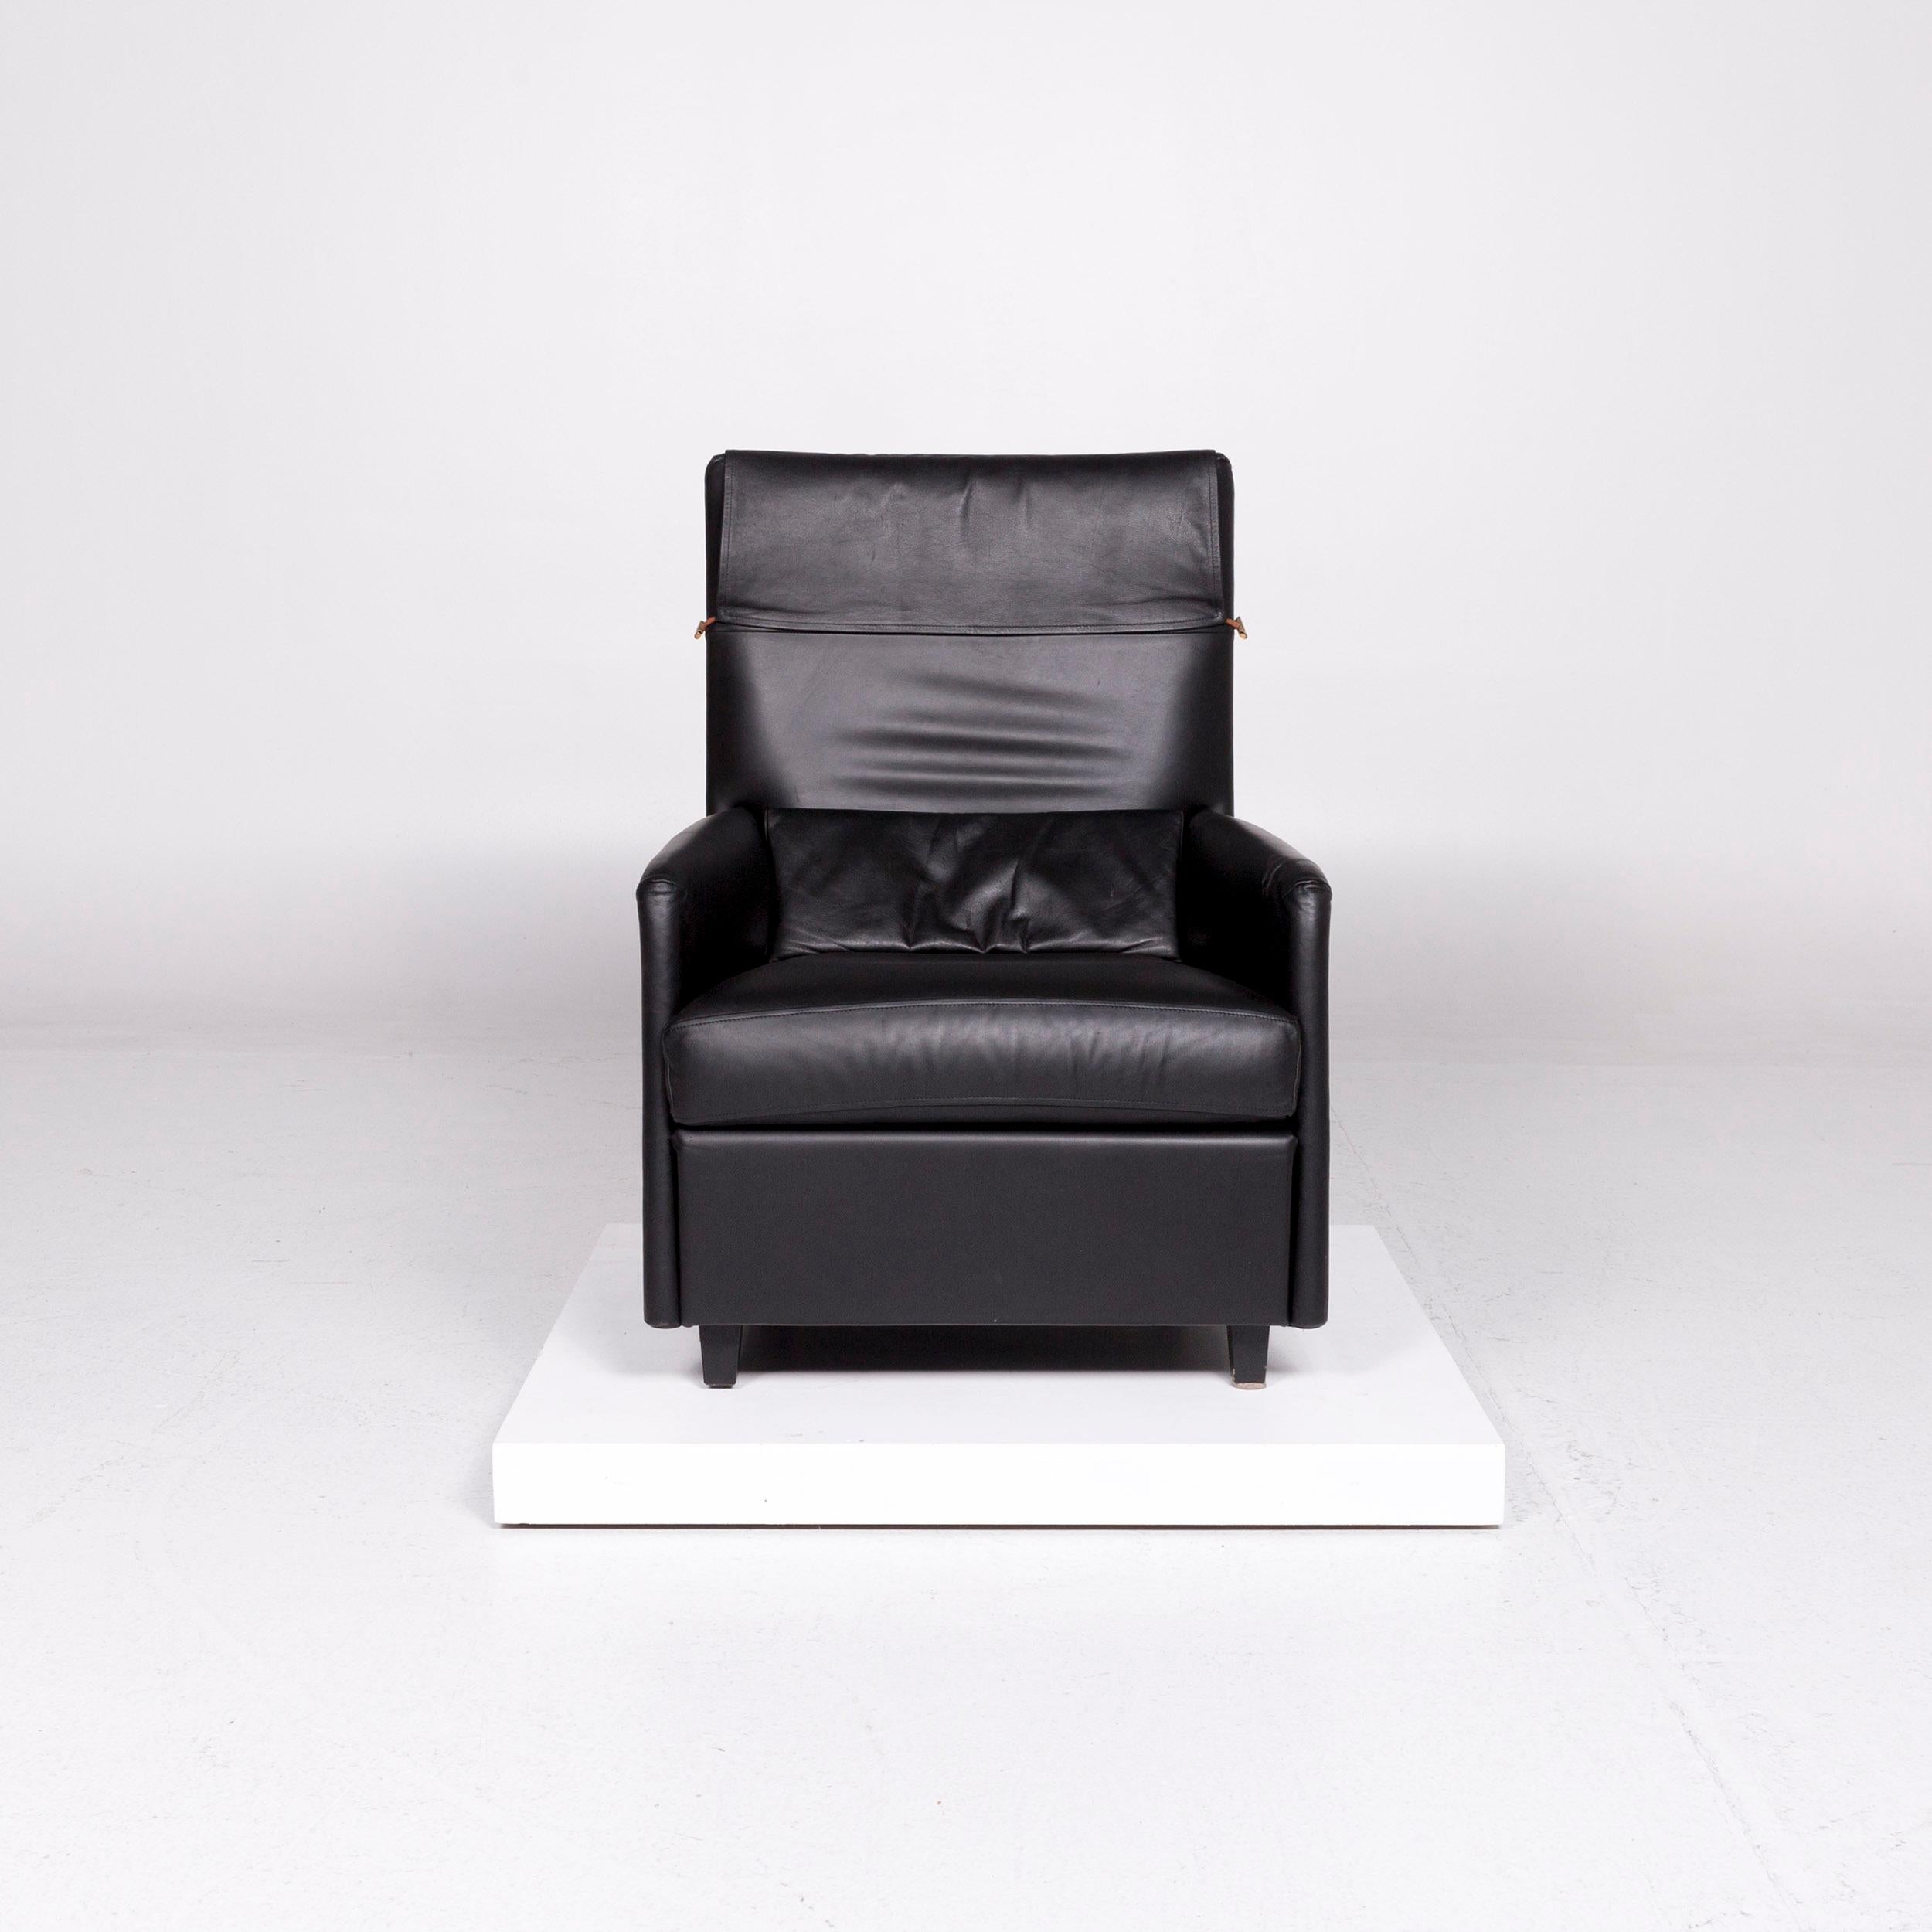 We bring to you a ligne roset leather armchair black.
 
 Product measurements in centimeters:
 
Depth 77
Width 66
Height 100
Seat-height 44
Rest-height 56
Seat-depth 51
Seat-width 52
Back-height 57.
  